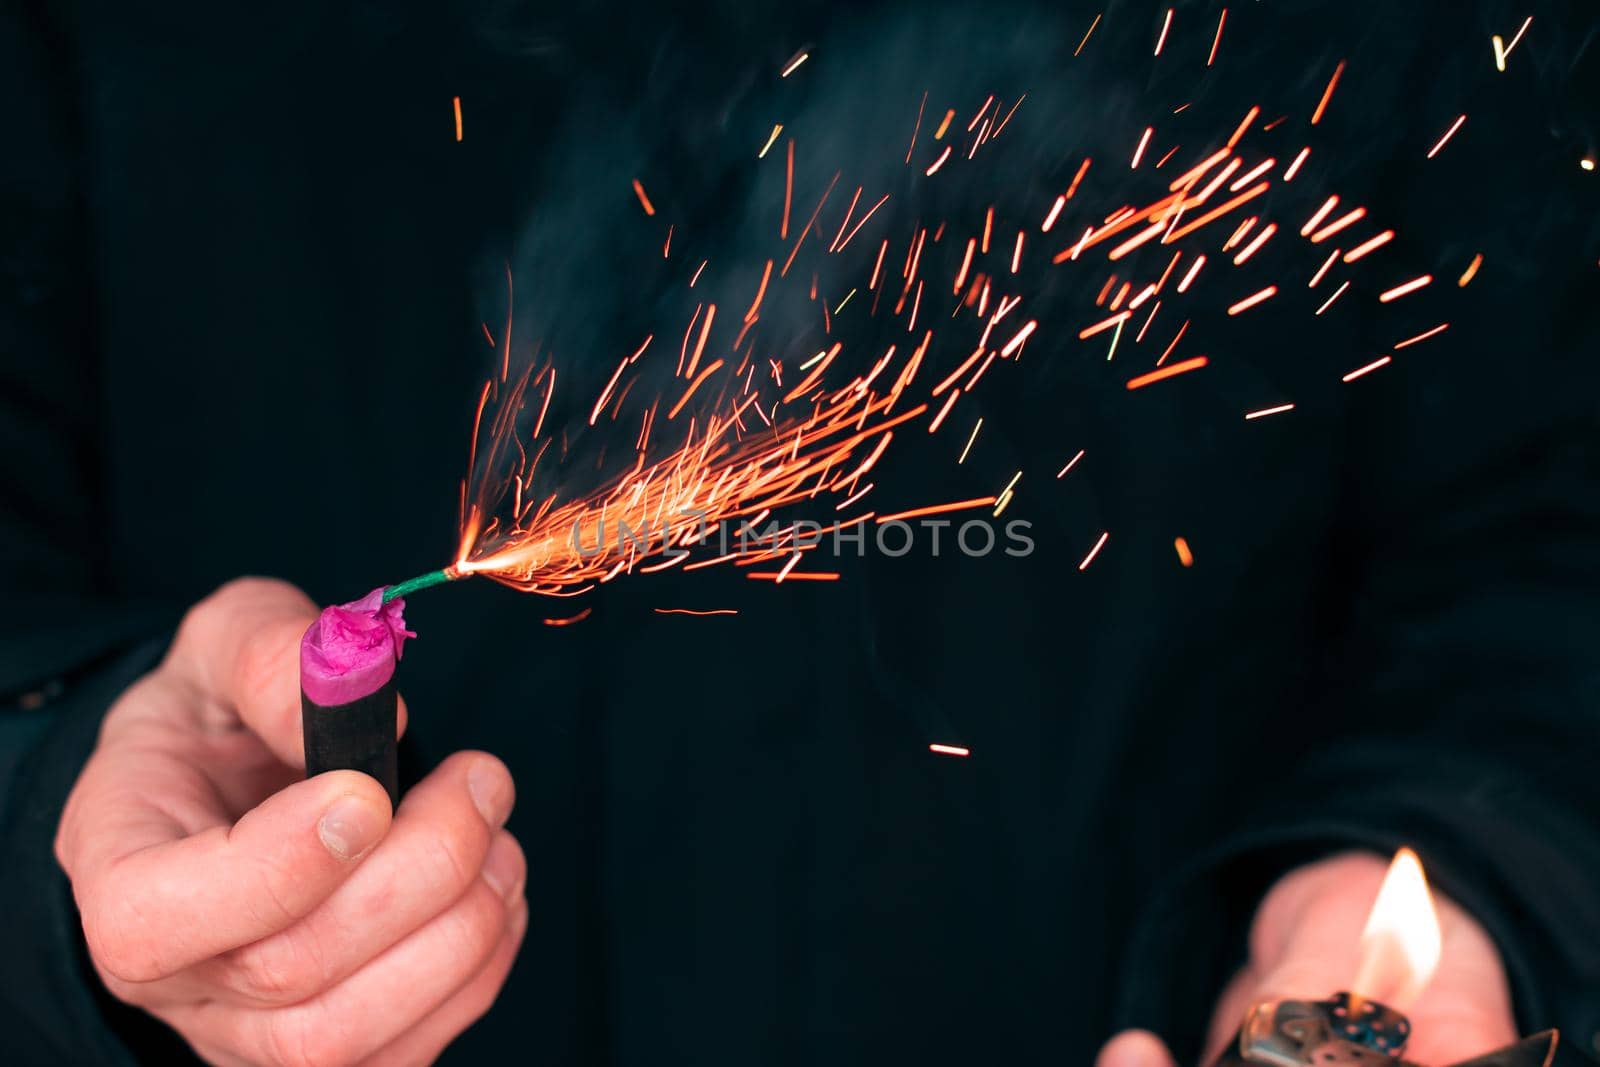 The Firecracker in a Hand. Man Holding a Burning Petard in His Hand. A Human with a Pyrotechnics that Burns with Sparks and Smoke Outdoors